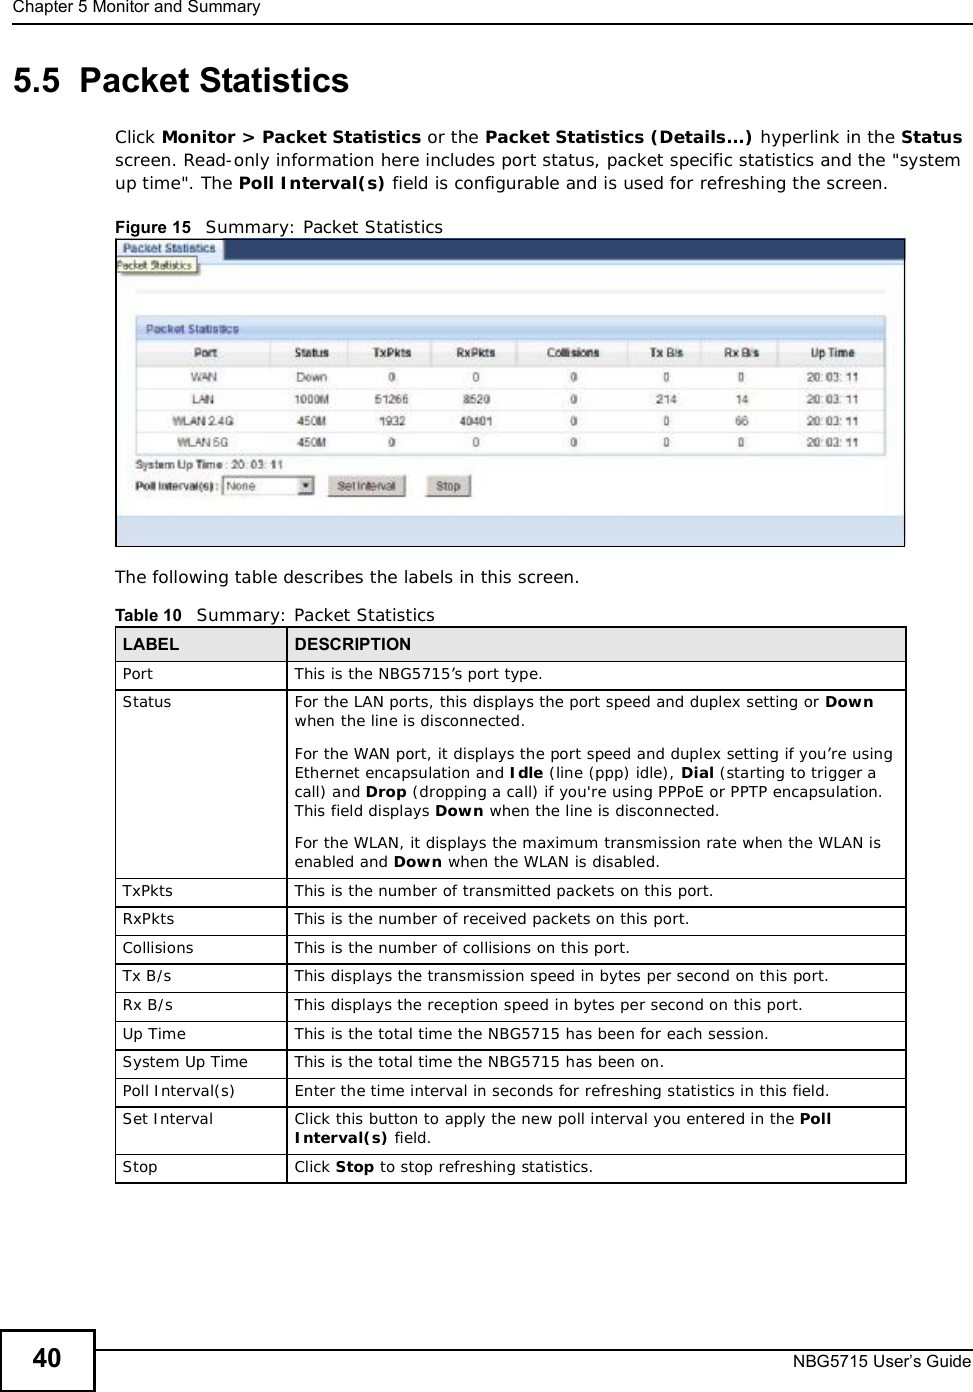 Chapter 5Monitor and SummaryNBG5715 User’s Guide405.5  Packet Statistics   Click Monitor &gt; Packet Statistics or the Packet Statistics (Details...) hyperlink in the Status screen. Read-only information here includes port status, packet specific statistics and the &quot;system up time&quot;. The Poll Interval(s) field is configurable and is used for refreshing the screen.Figure 15   Summary: Packet Statistics The following table describes the labels in this screen.Table 10   Summary: Packet StatisticsLABEL DESCRIPTIONPort This is the NBG5715’s port type.Status  For the LAN ports, this displays the port speed and duplex setting or Downwhen the line is disconnected.For the WAN port, it displays the port speed and duplex setting if you’re using Ethernet encapsulation and Idle (line (ppp) idle), Dial (starting to trigger a call) and Drop (dropping a call) if you&apos;re using PPPoE or PPTP encapsulation. This field displays Down when the line is disconnected.For the WLAN, it displays the maximum transmission rate when the WLAN is enabled and Down when the WLAN is disabled.TxPkts  This is the number of transmitted packets on this port.RxPkts  This is the number of received packets on this port.Collisions  This is the number of collisions on this port.Tx B/s  This displays the transmission speed in bytes per second on this port.Rx B/s This displays the reception speed in bytes per second on this port.Up Time This is the total time the NBG5715 has been for each session.System Up Time This is the total time the NBG5715 has been on.Poll Interval(s) Enter the time interval in seconds for refreshing statistics in this field.Set Interval Click this button to apply the new poll interval you entered in the Poll Interval(s) field.Stop Click Stop to stop refreshing statistics.